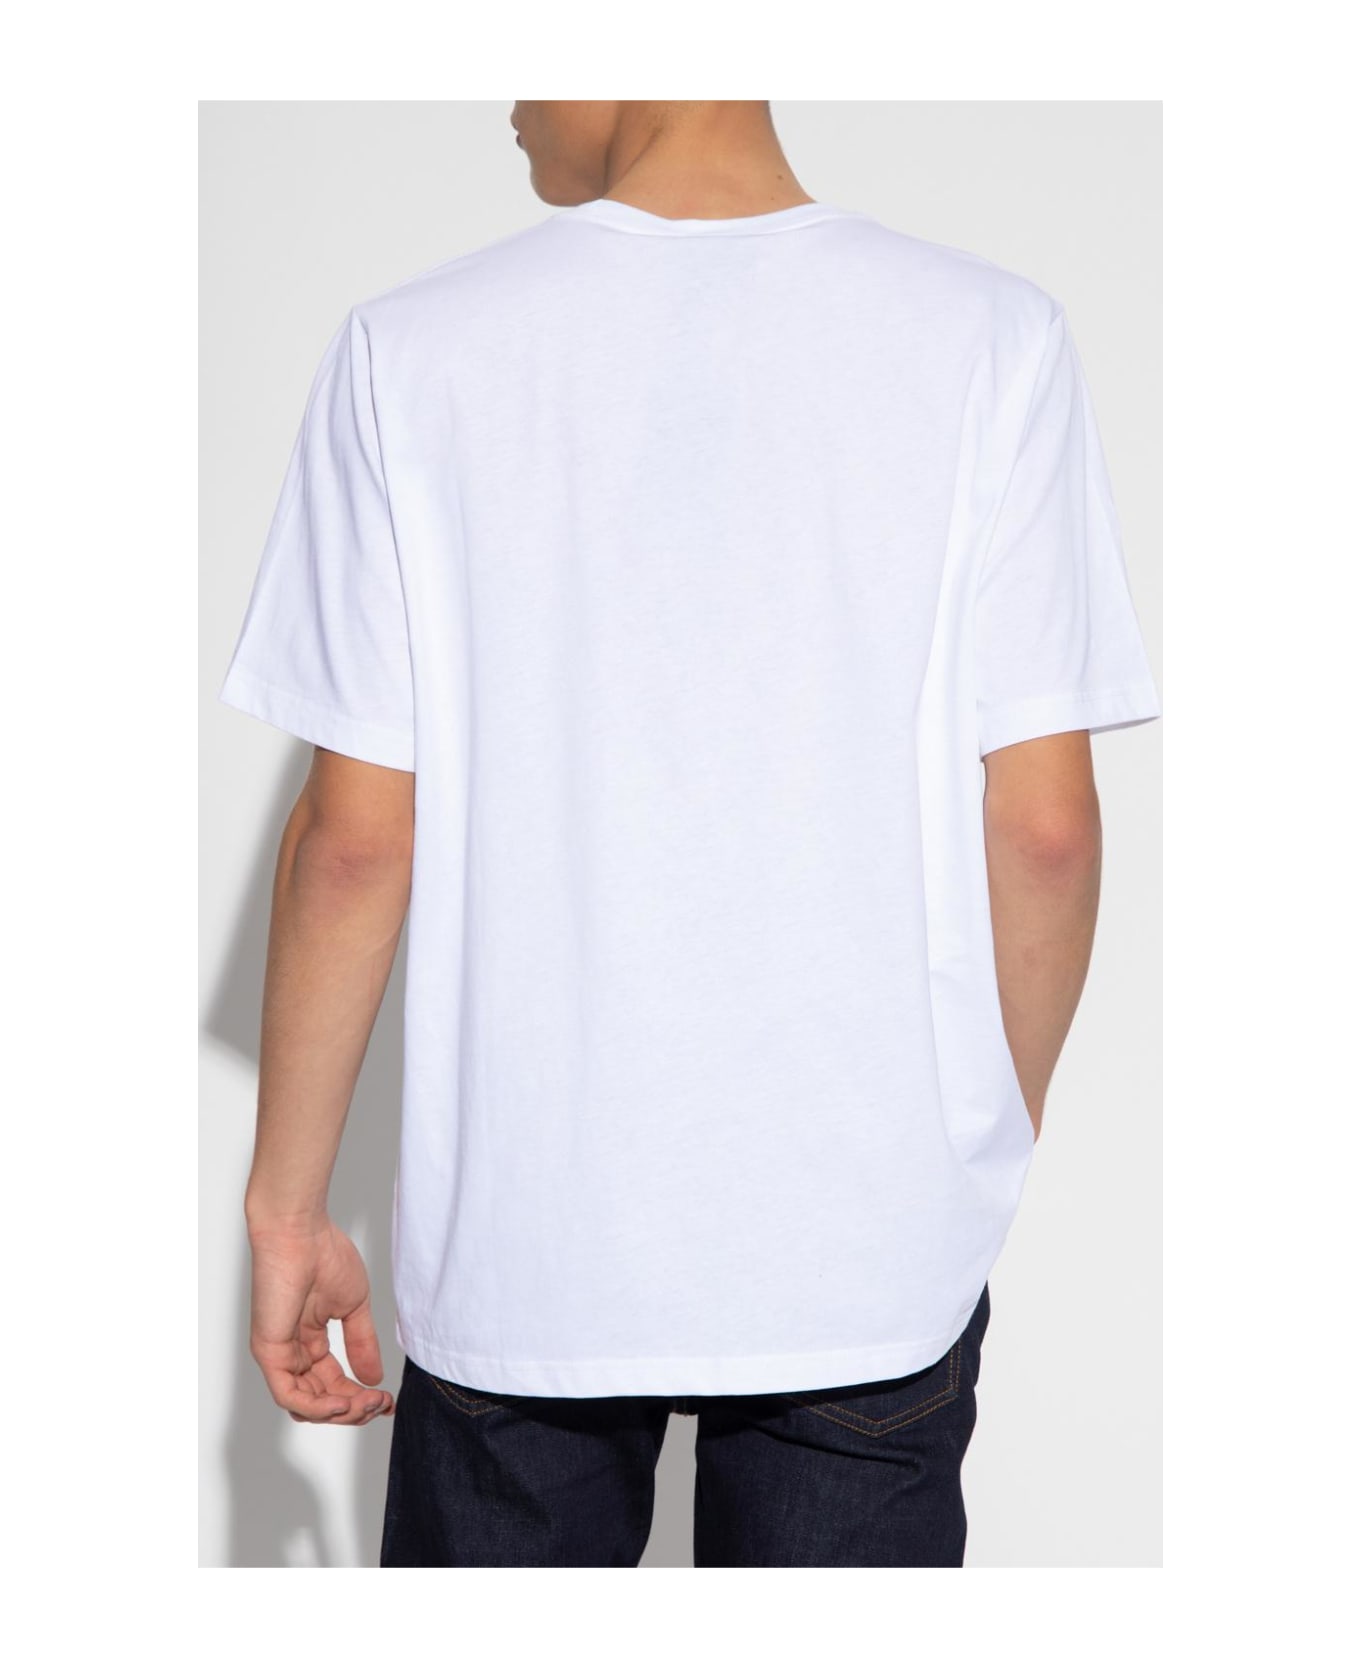 Paul Smith T-shirt With Patch - WHITE